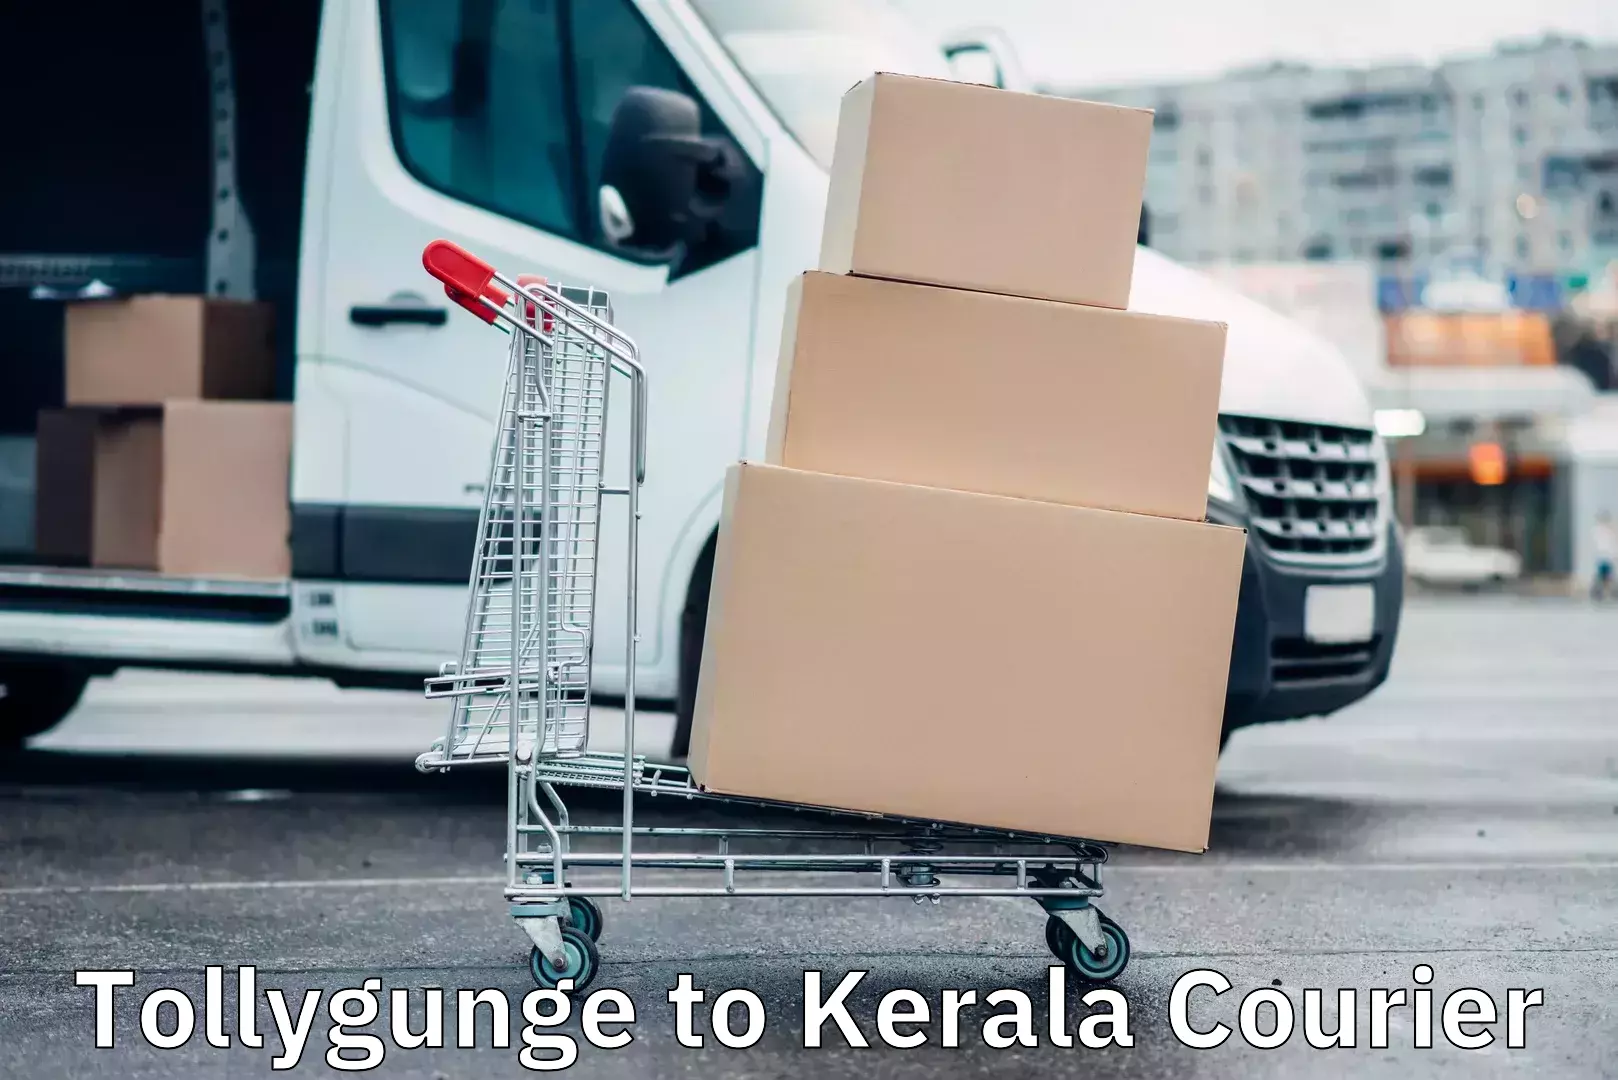 Package delivery network Tollygunge to Kerala